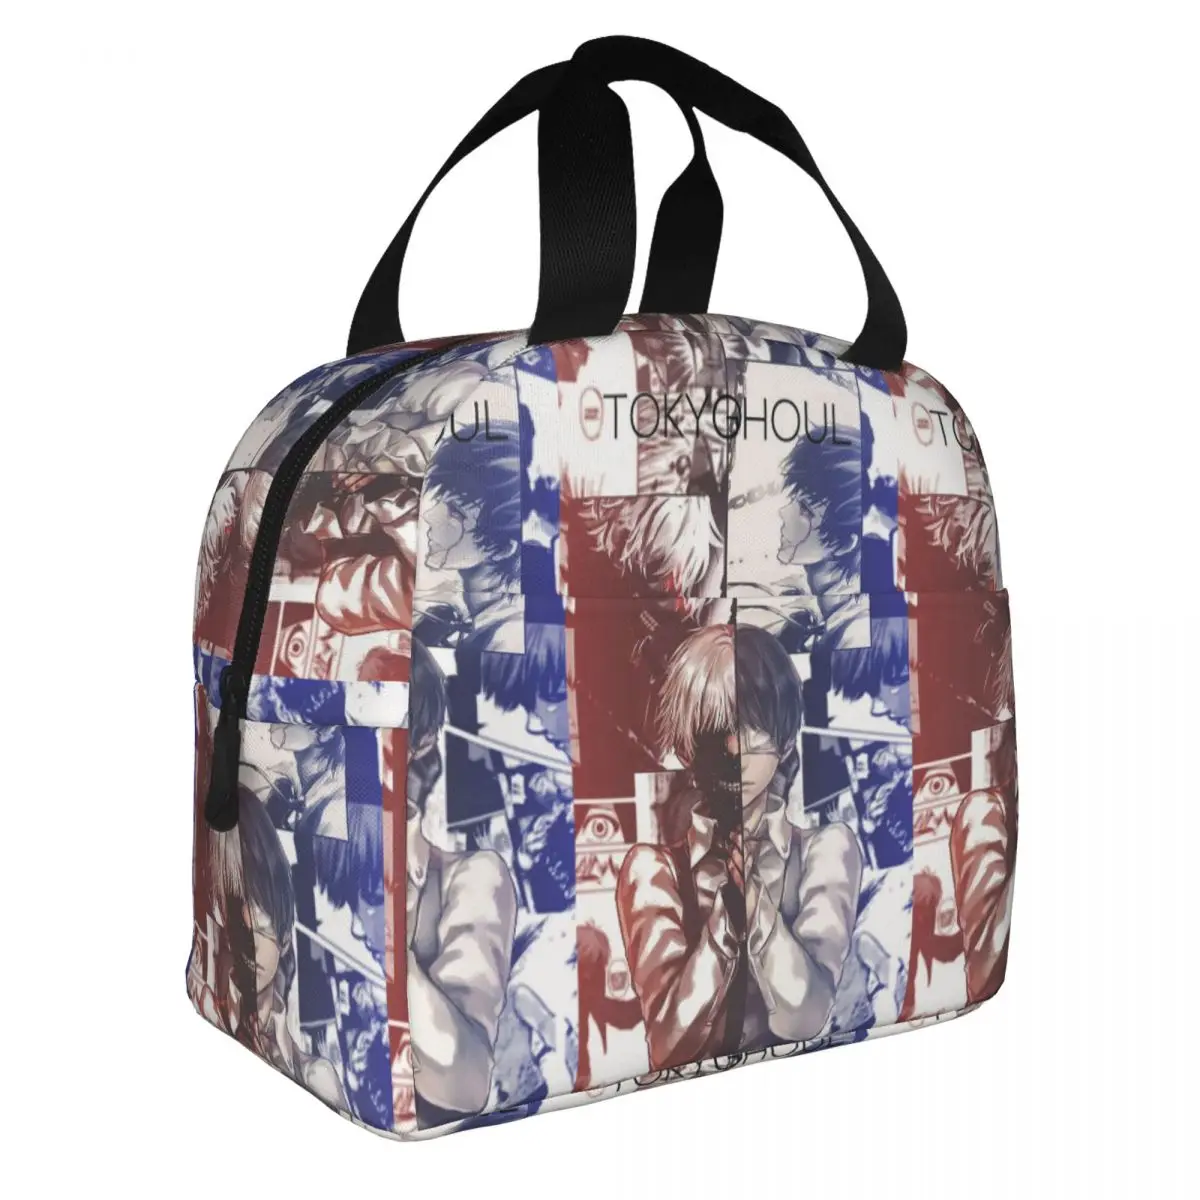 

Harajuku Horror Tokyo Ghoul Kaneki Insulated Lunch Bag Thermal Bag Meal Container Japanese Manga Anime Movie Tote Lunch Box